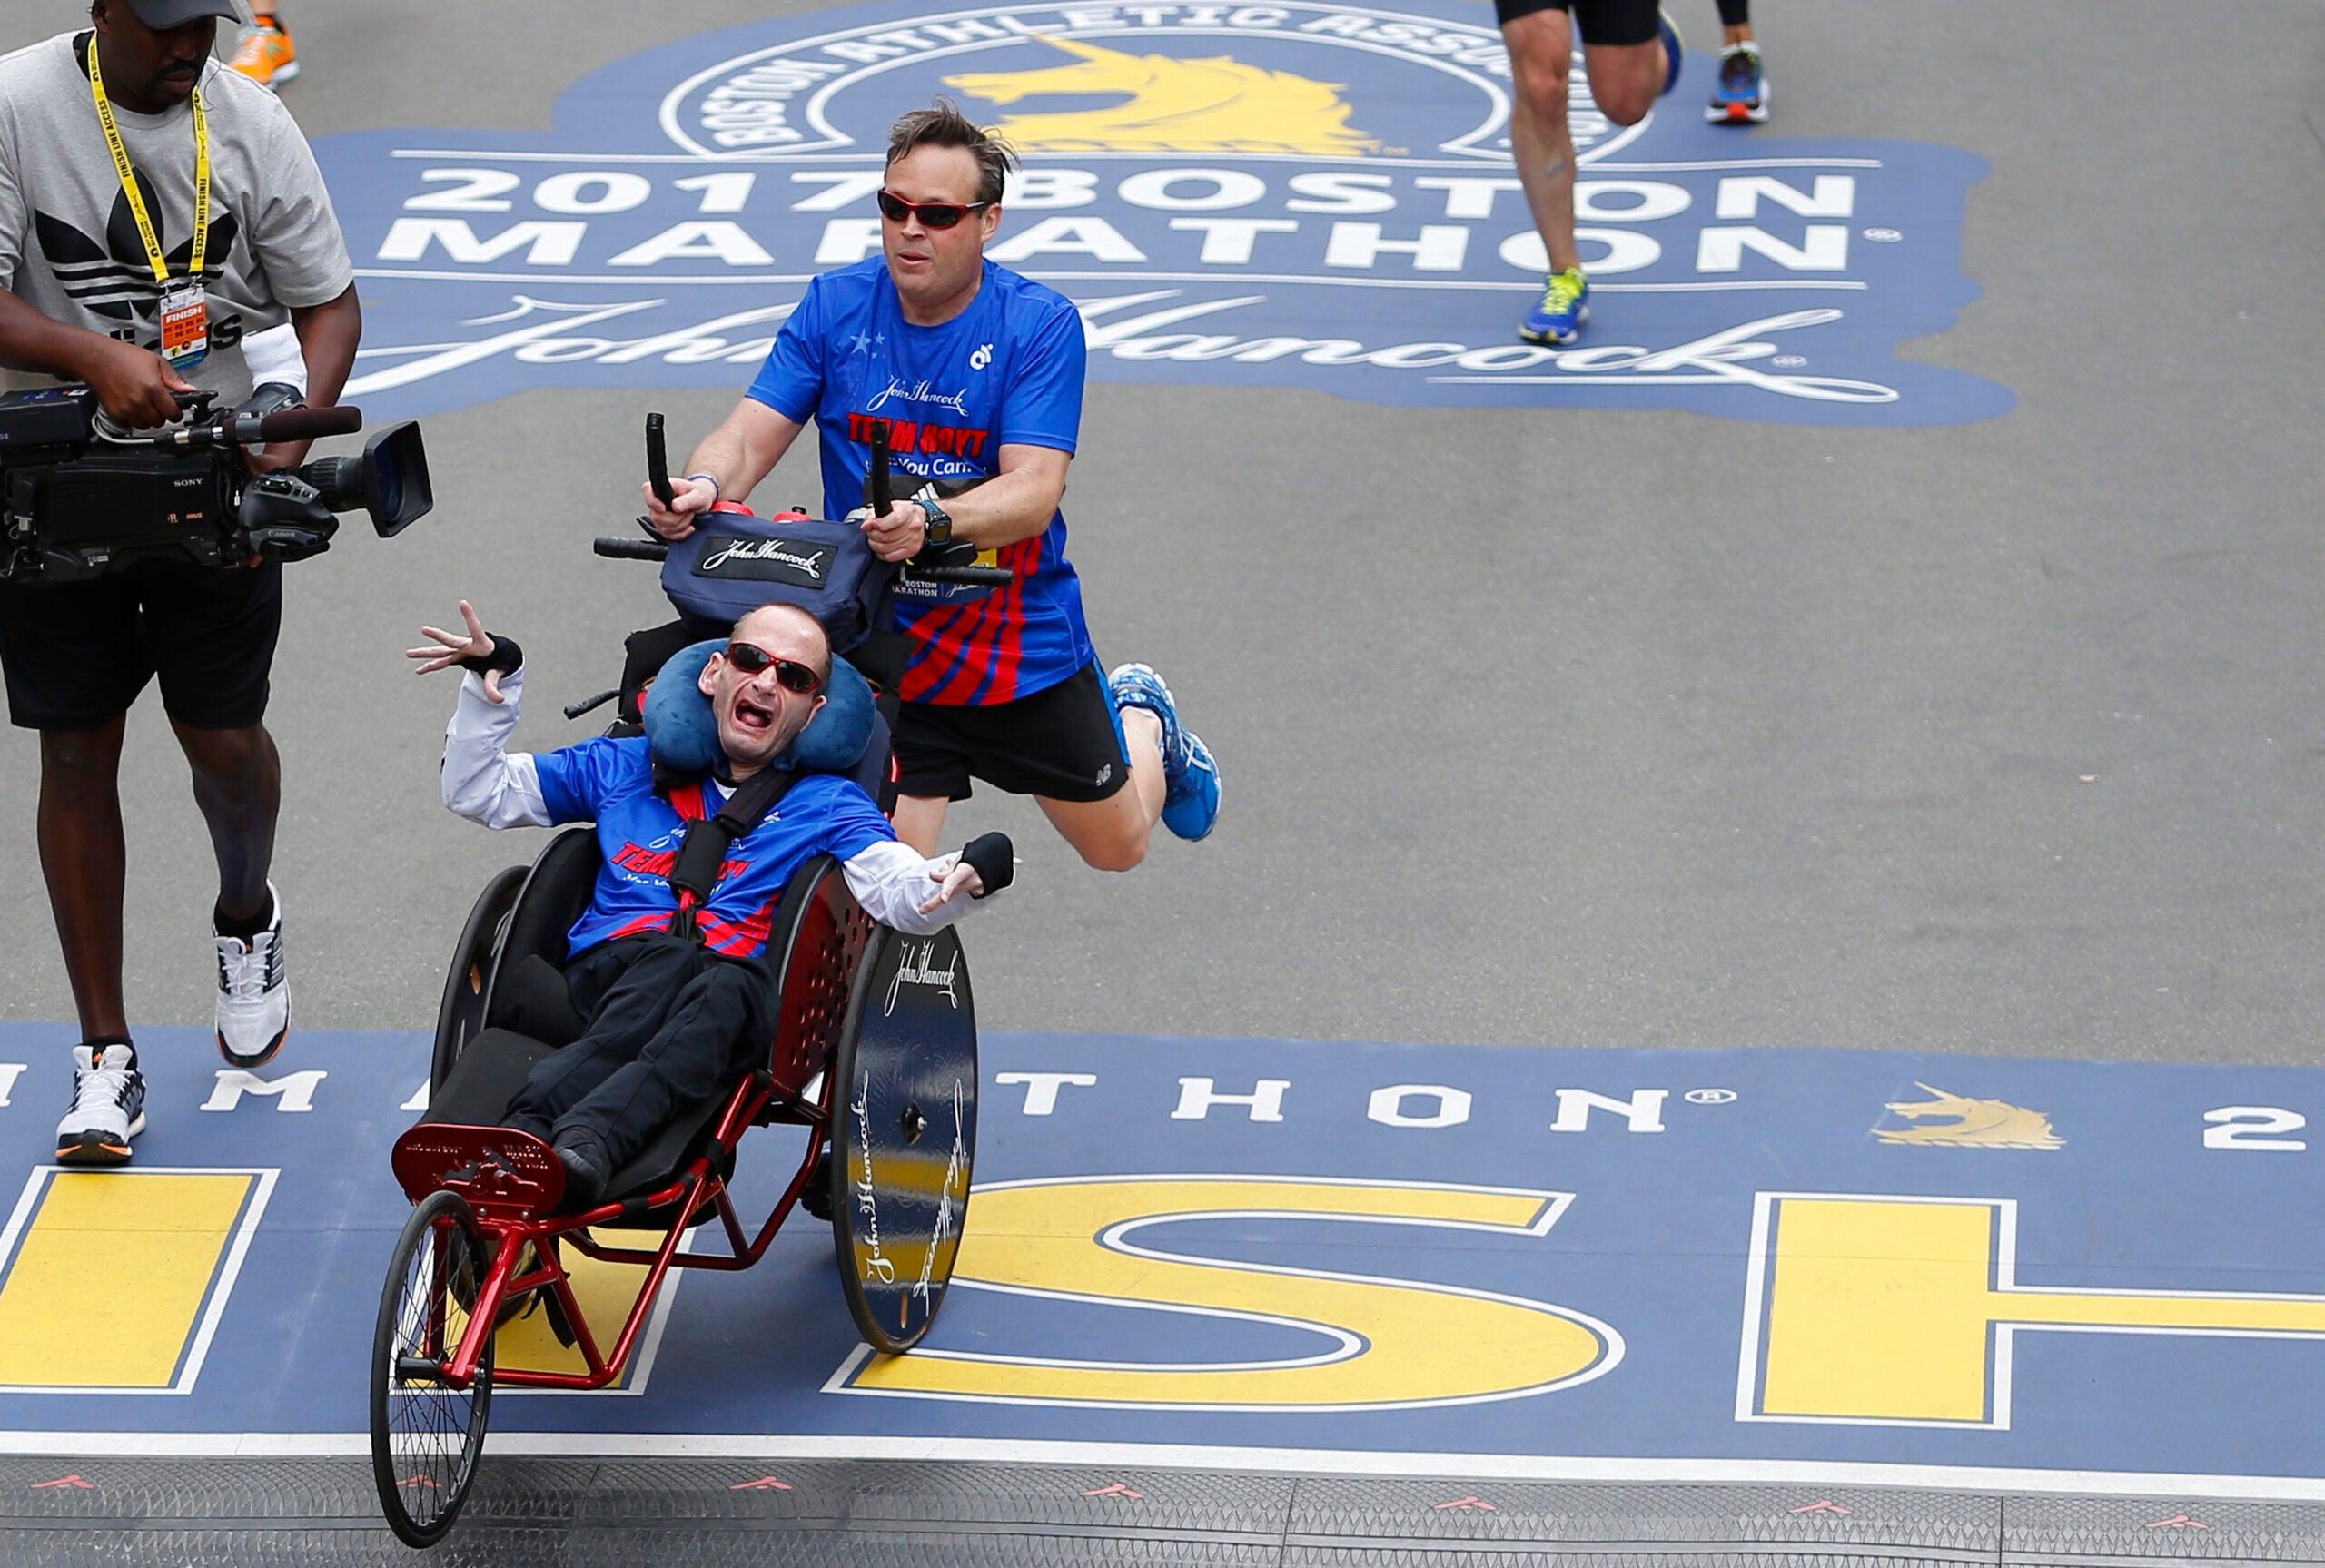 Rick Hoyt remembers his father Dick ahead of traditional Boston